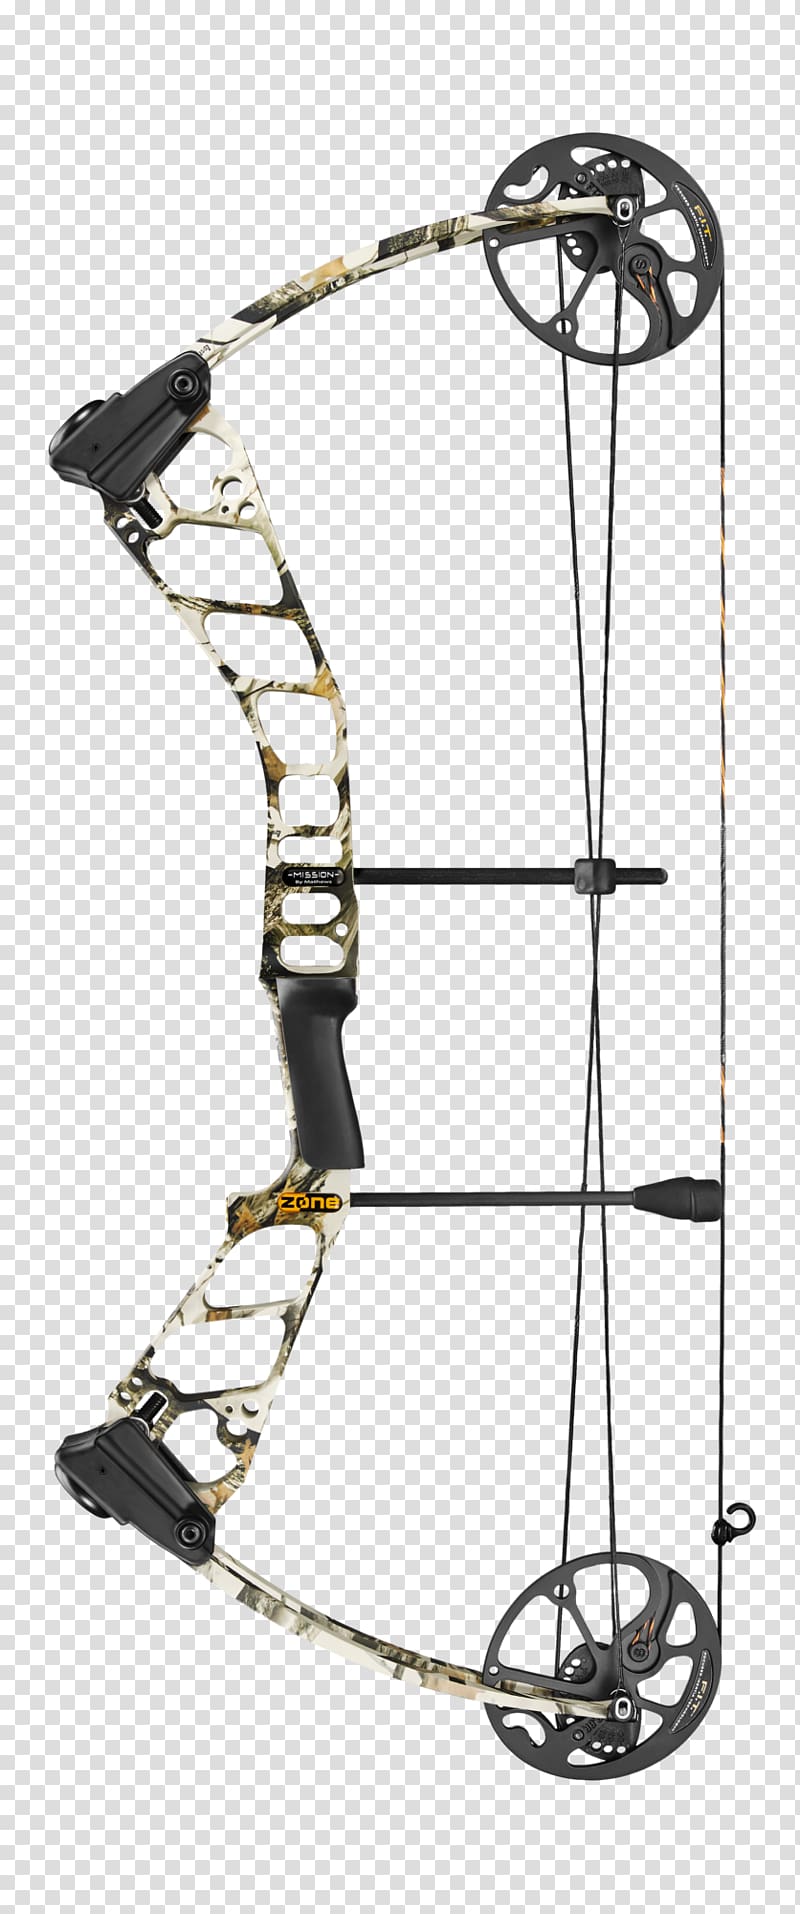 Compound Bows Archery Bow and arrow Bowhunting, madden 70 percent off zone transparent background PNG clipart